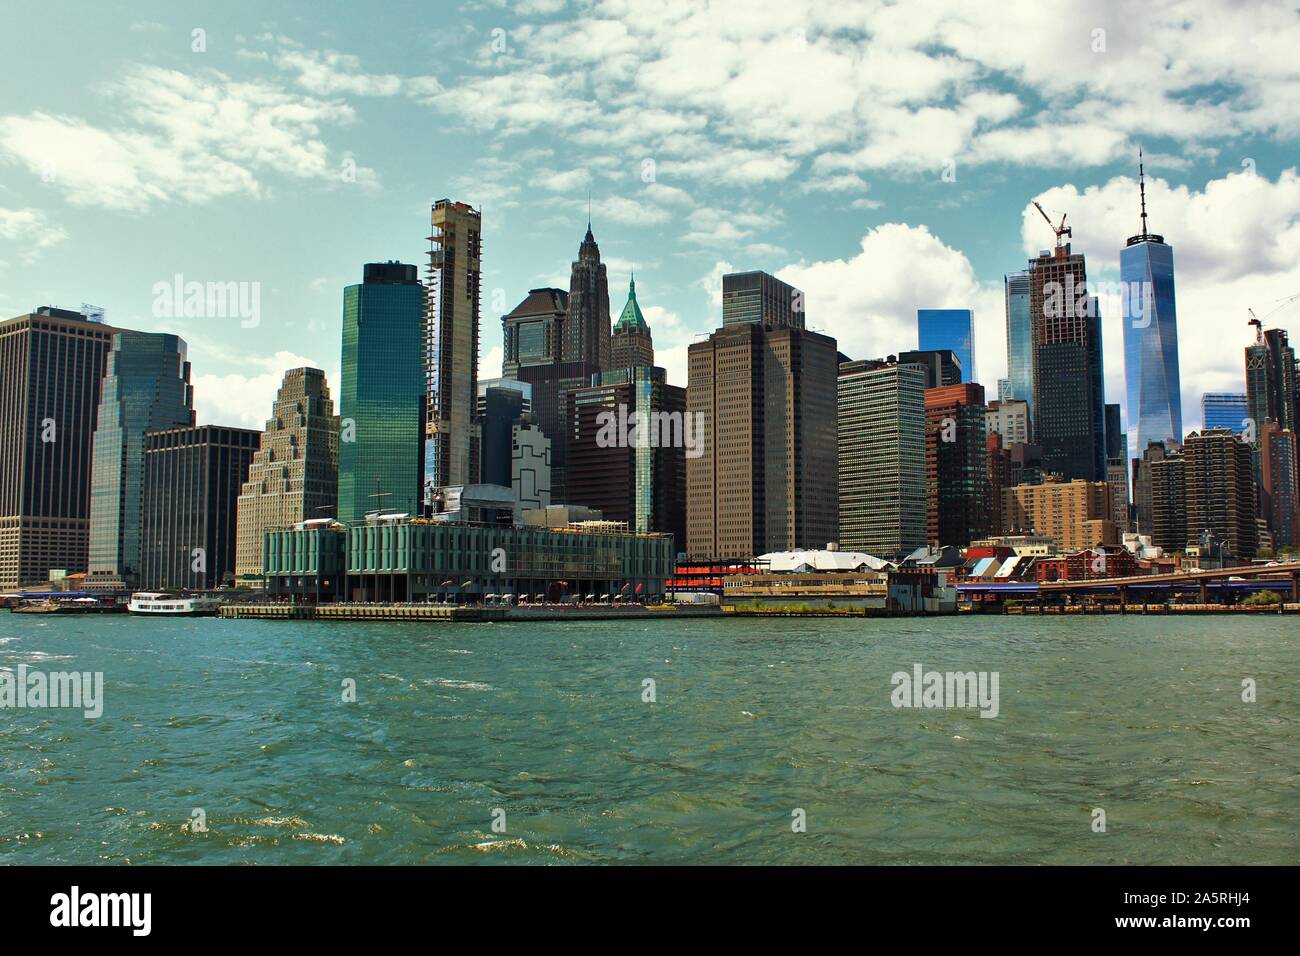 View from the East River in New York City, of the skyscrapers that make up the skyline of Downtown Lower Manhattan. Stock Photo